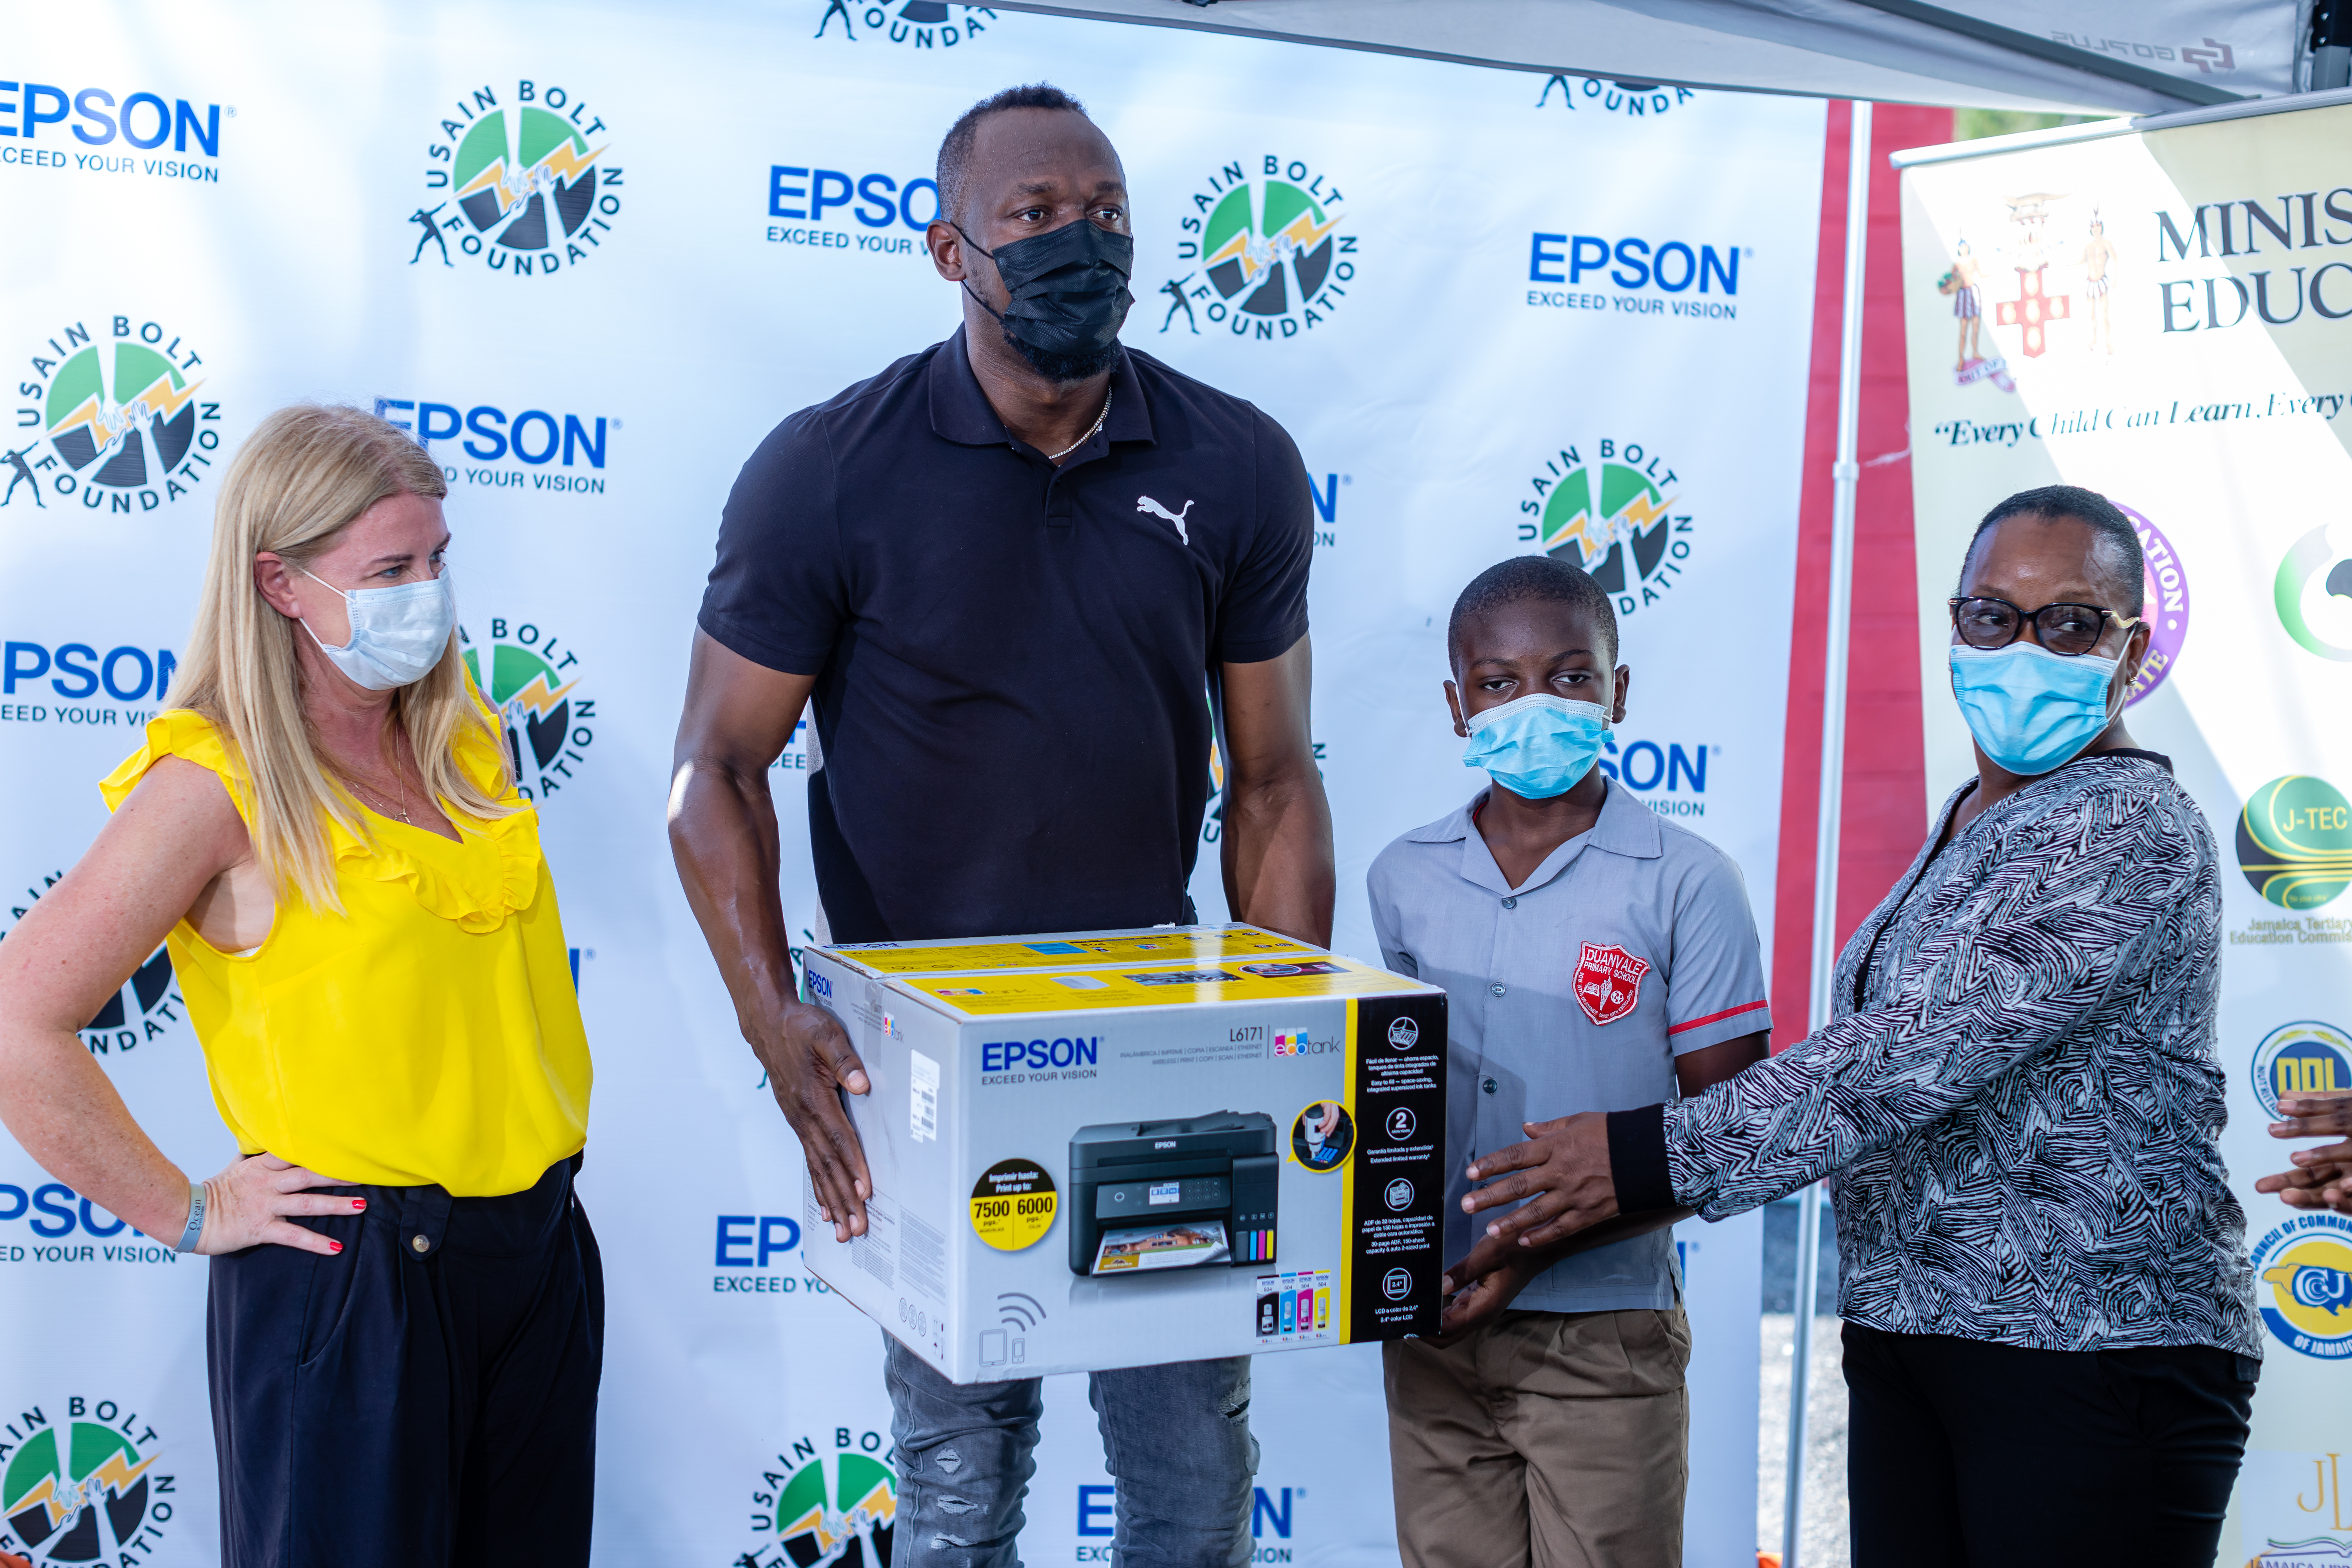 USAIN BOLT FOUNDATION AND EPSON PARTNERS TO BRING DREAMS TO COLOUR